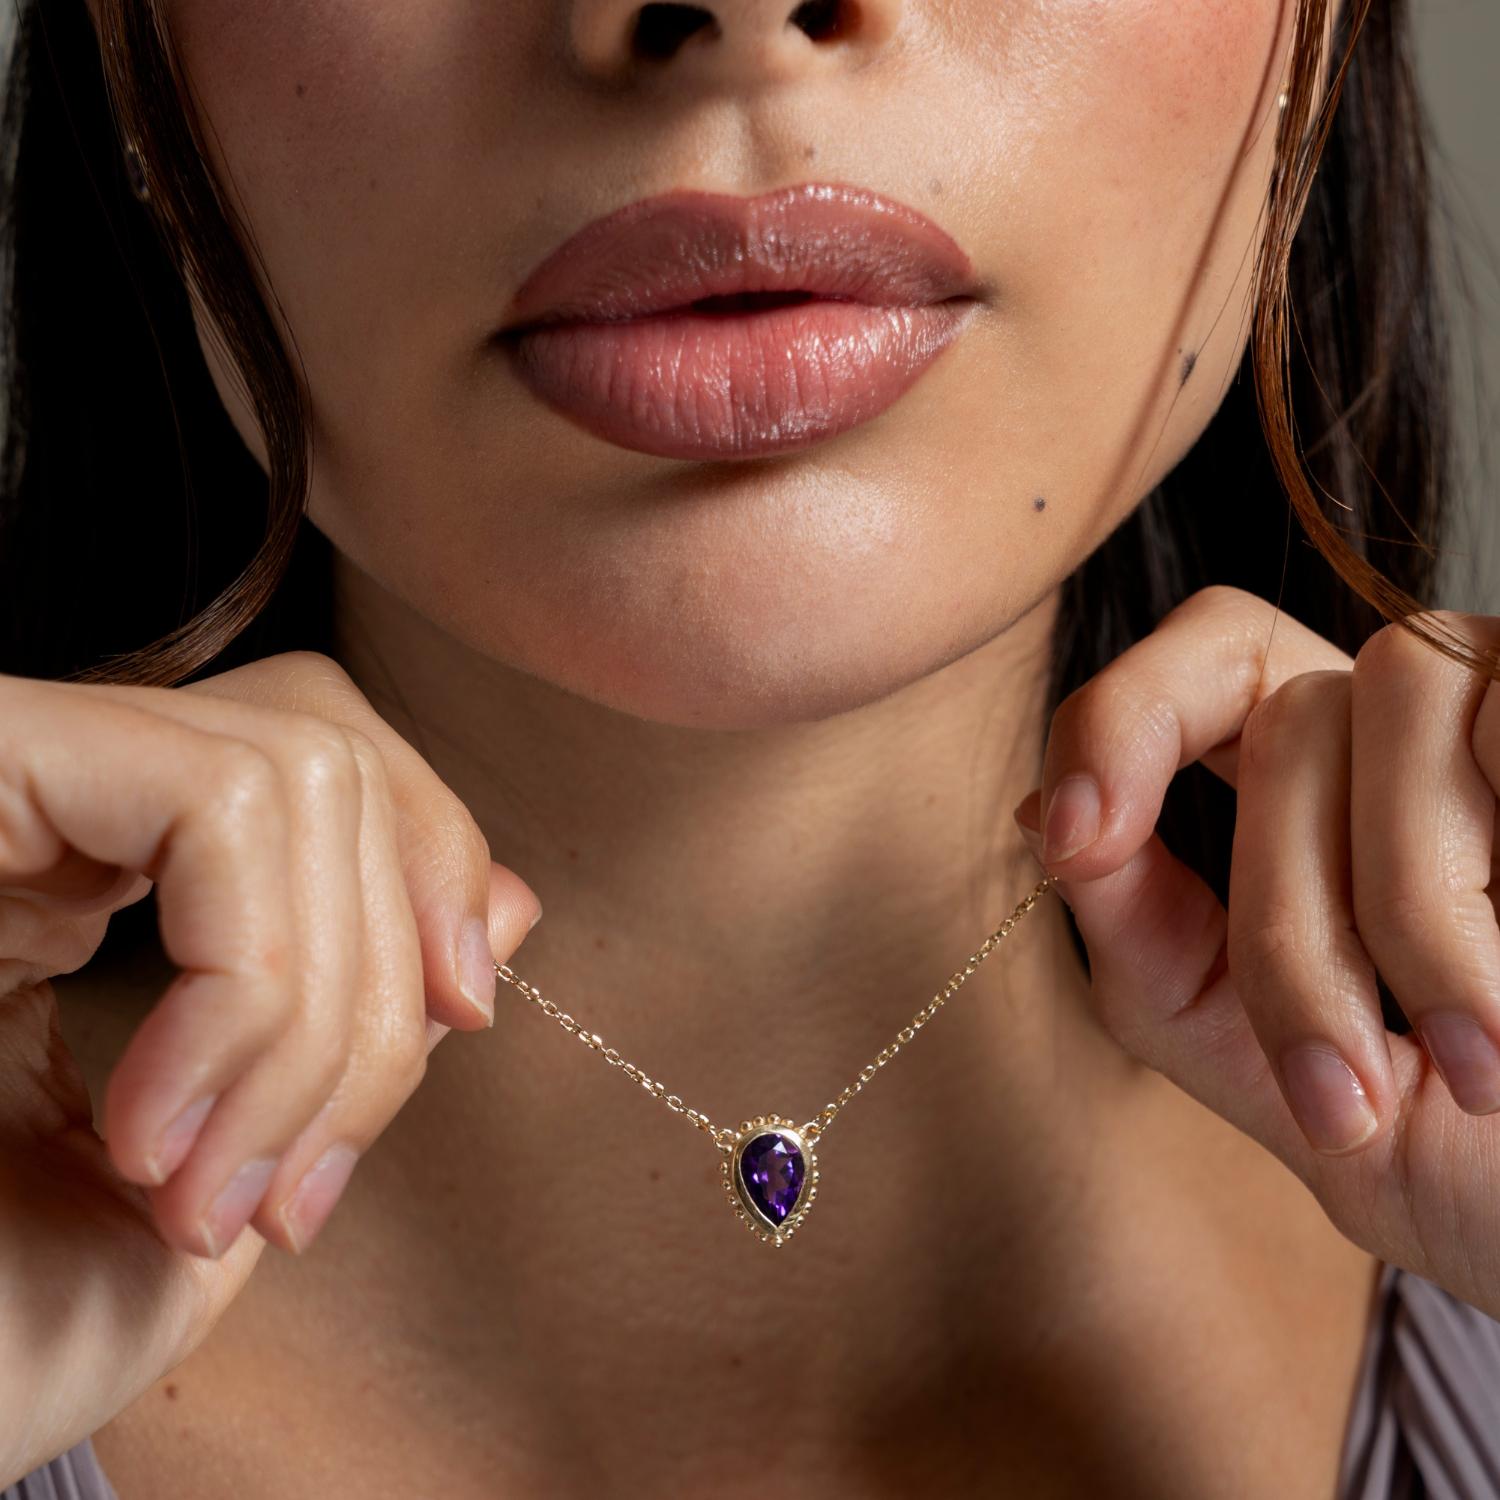 This elegant pendant is set with a pear cut amethyst in solid 14k yellow gold and features granulated spheres around the outside of the rub-over setting. Inspired by creatures of the coral reef, our colourful Anemone collection is fascinating in its